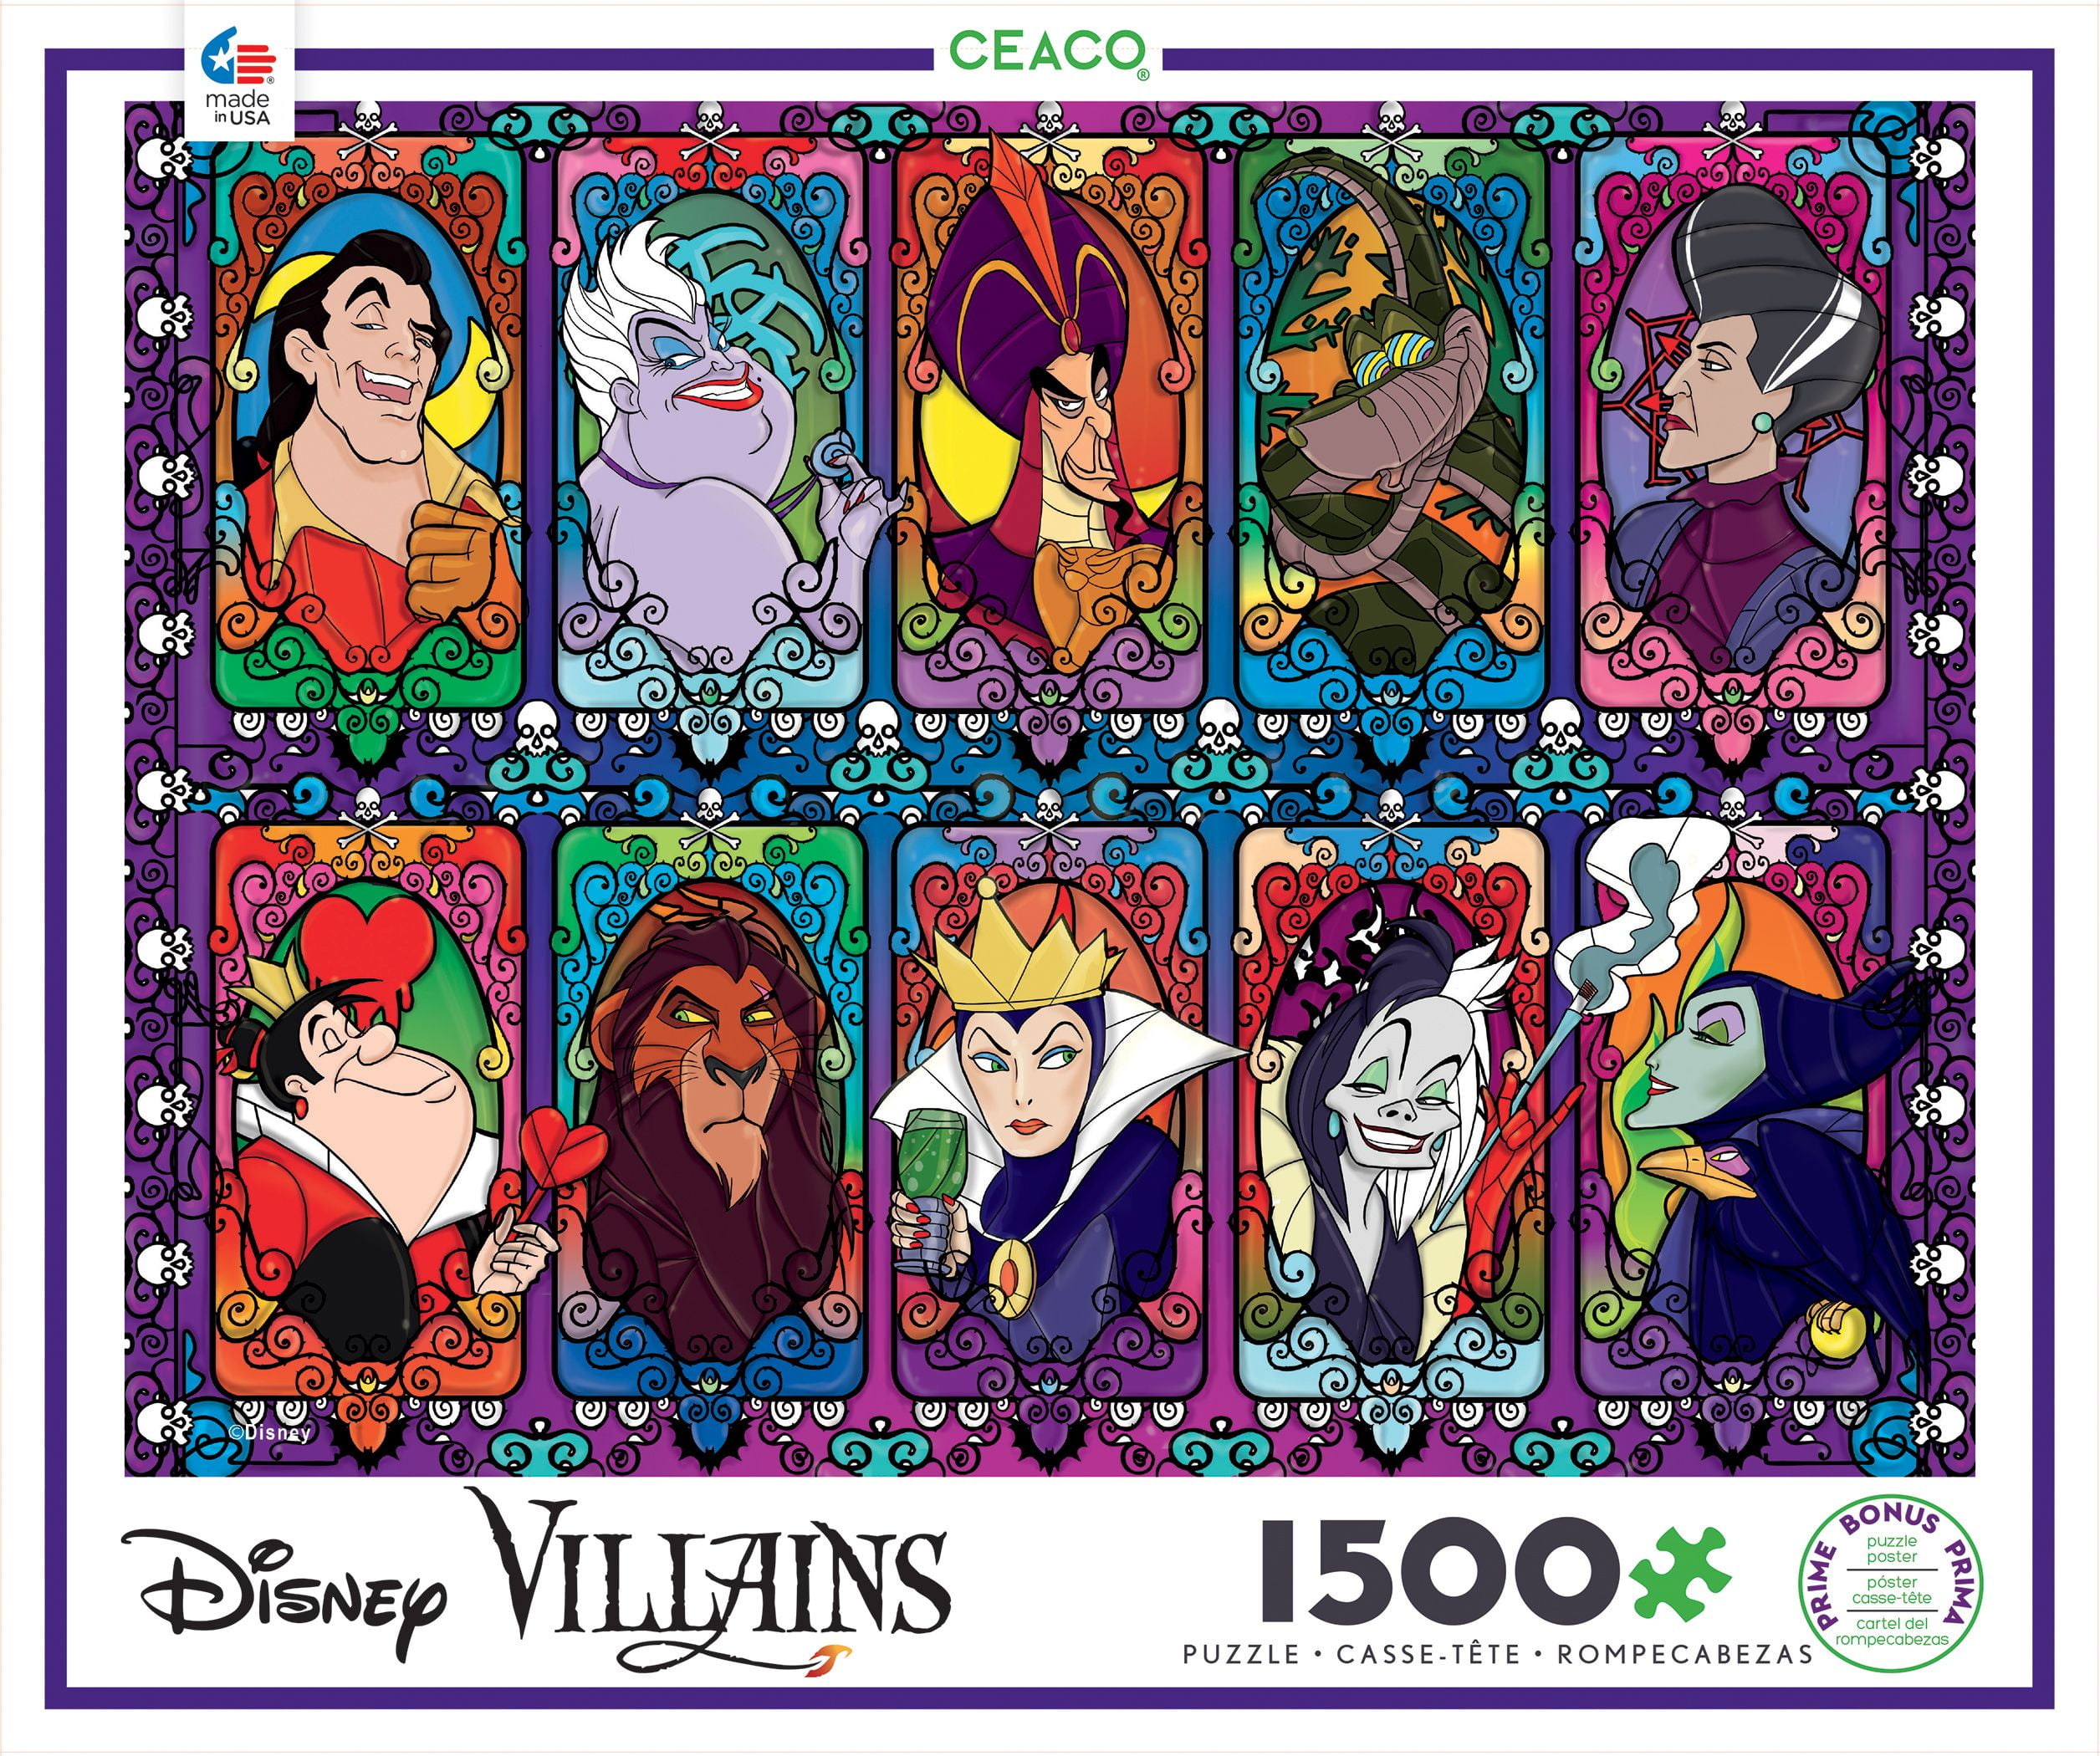 Disney Villains 1500 Piece Jigsaw Puzzle Ceaco FAST FREE SHIPPING NEW 